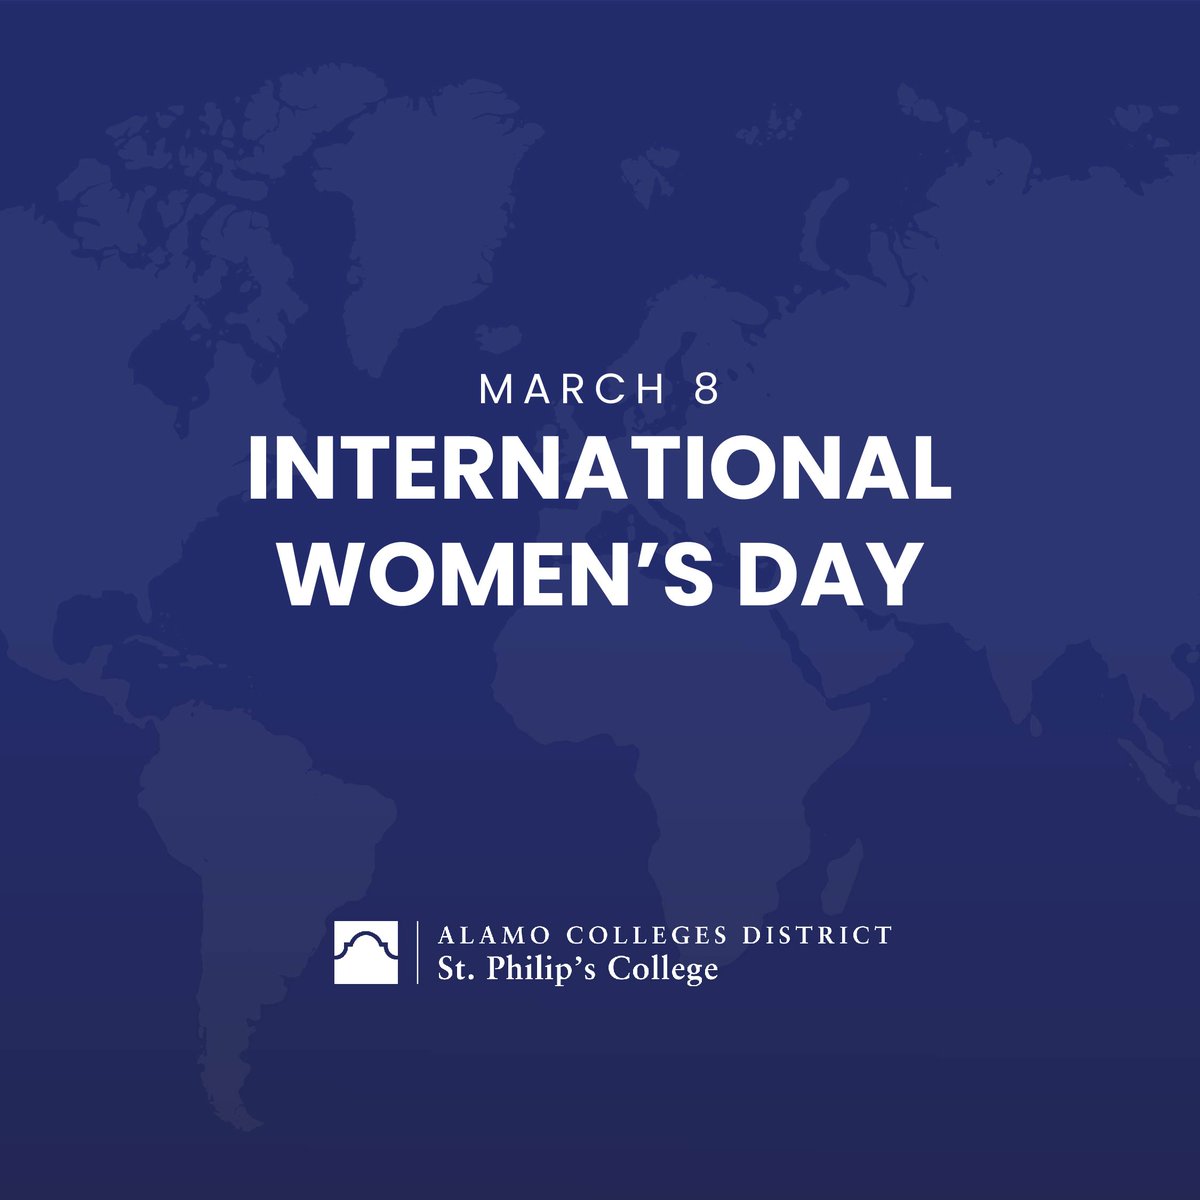 Happy International Women's Day! Today, we honor the strength, resilience, and achievements of women around the world.